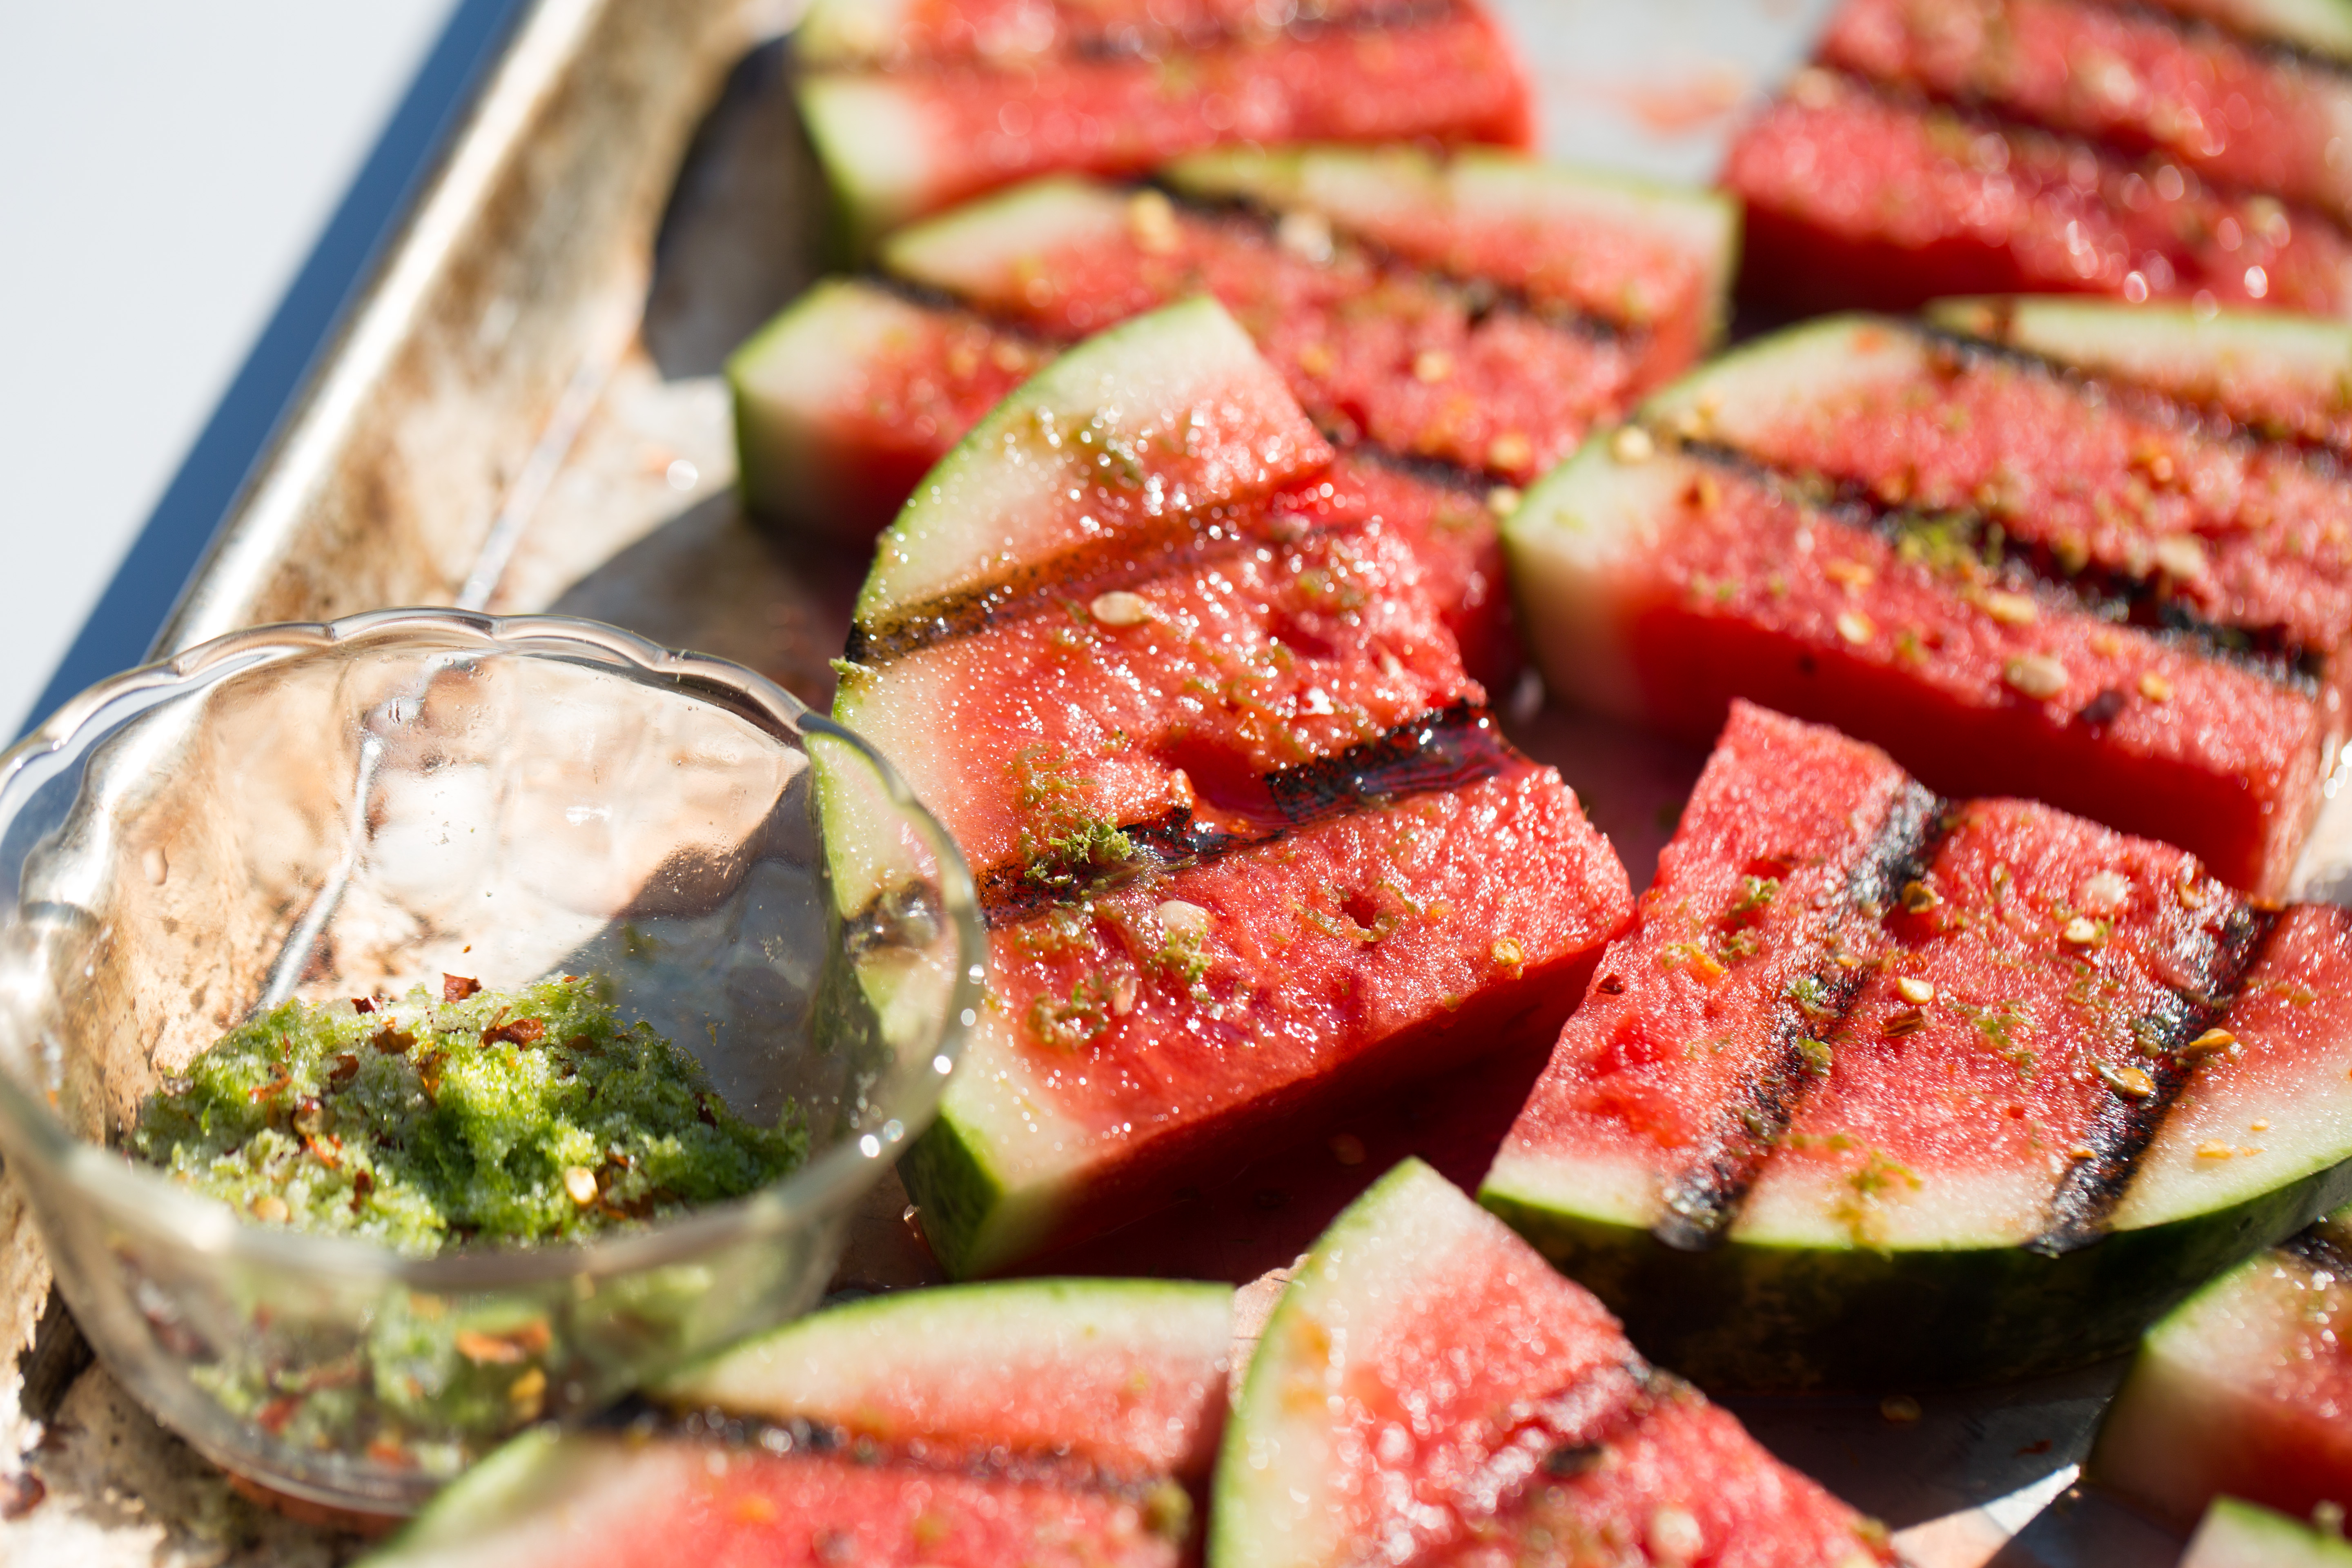 How To Grill Watermelon (Easy 5-Step Recipe) | The Kitchn